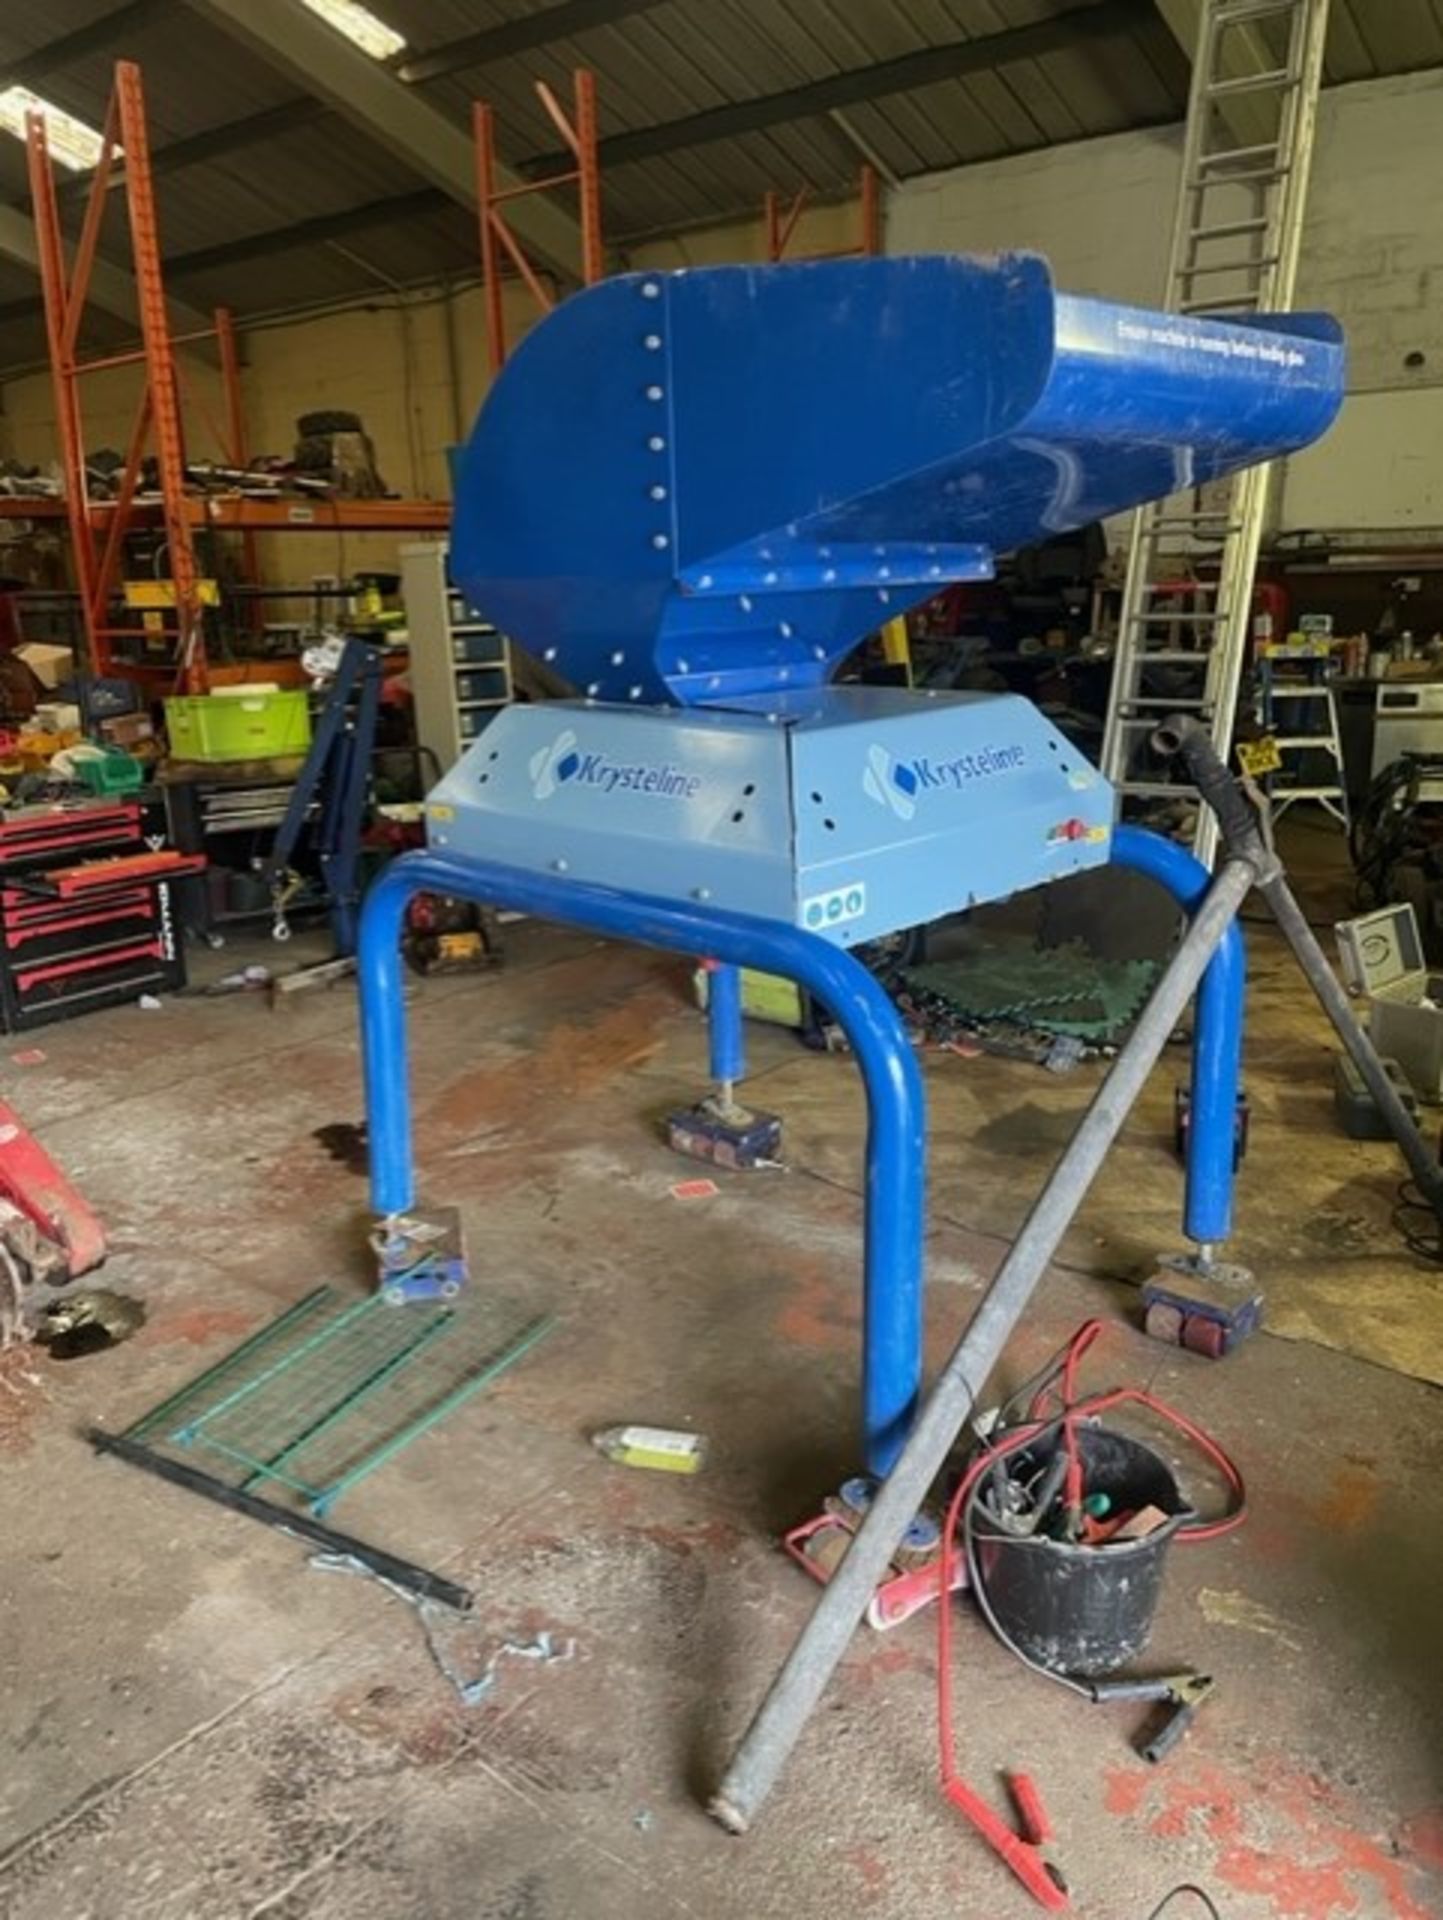 Krysteline glass crushing machine you throw bottles in shoot at top and they go through the